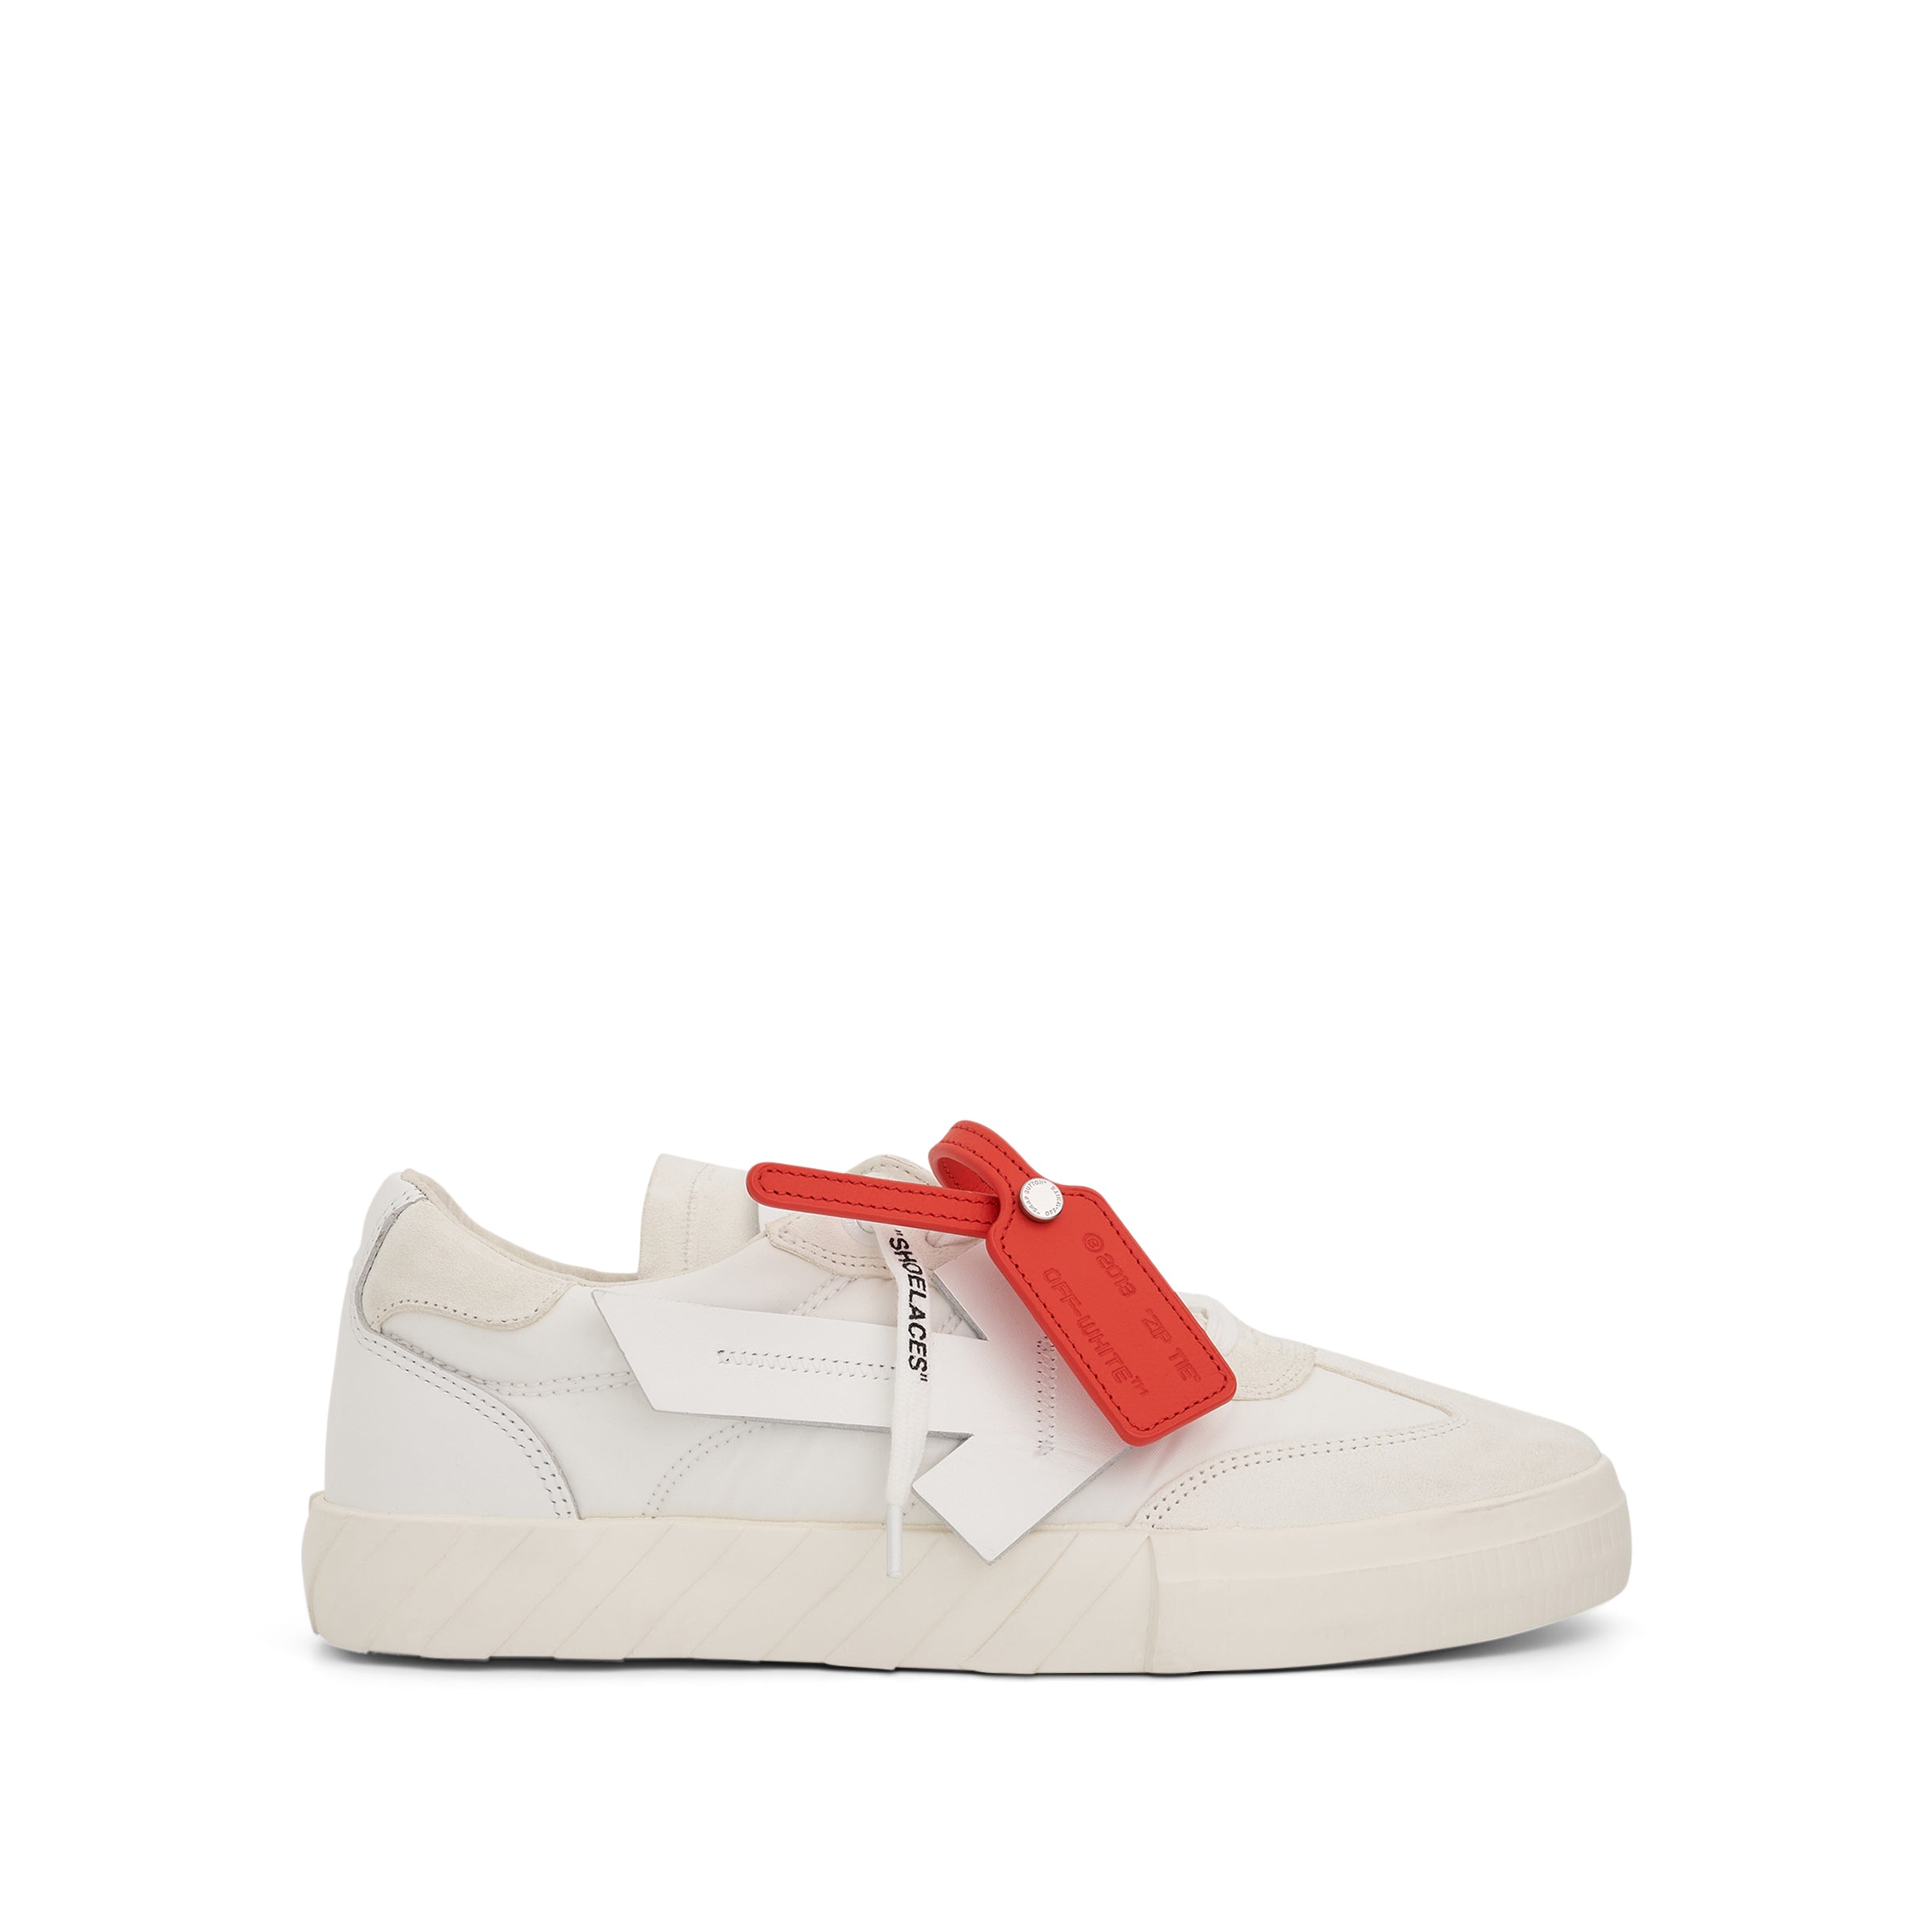 off white floating arrow low vulcanised leather sneaker in white sold ...